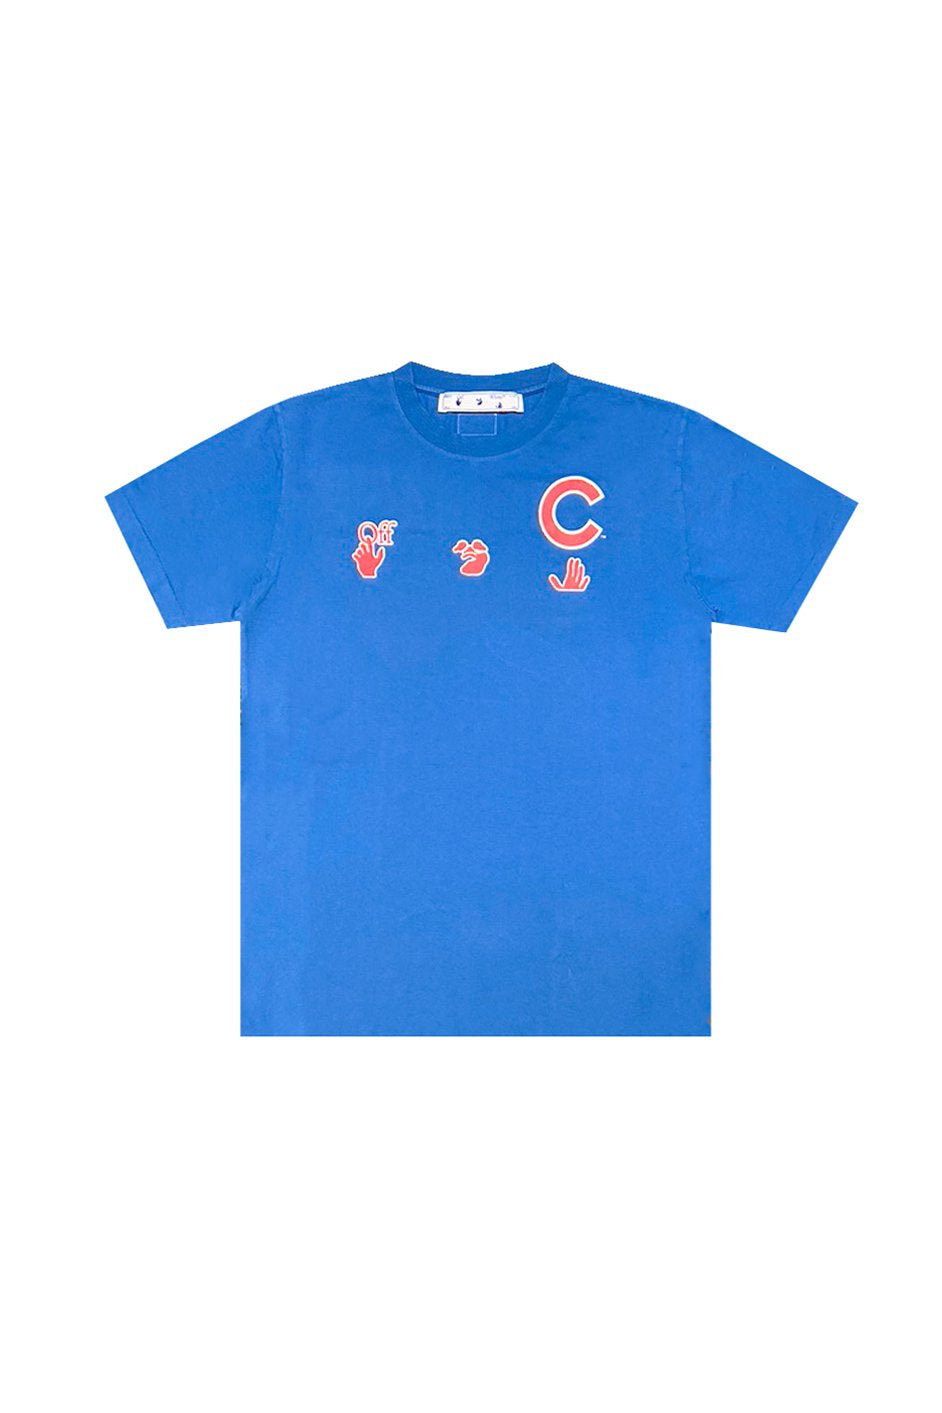 MLB_CHICAGO CUBS S/S TEE